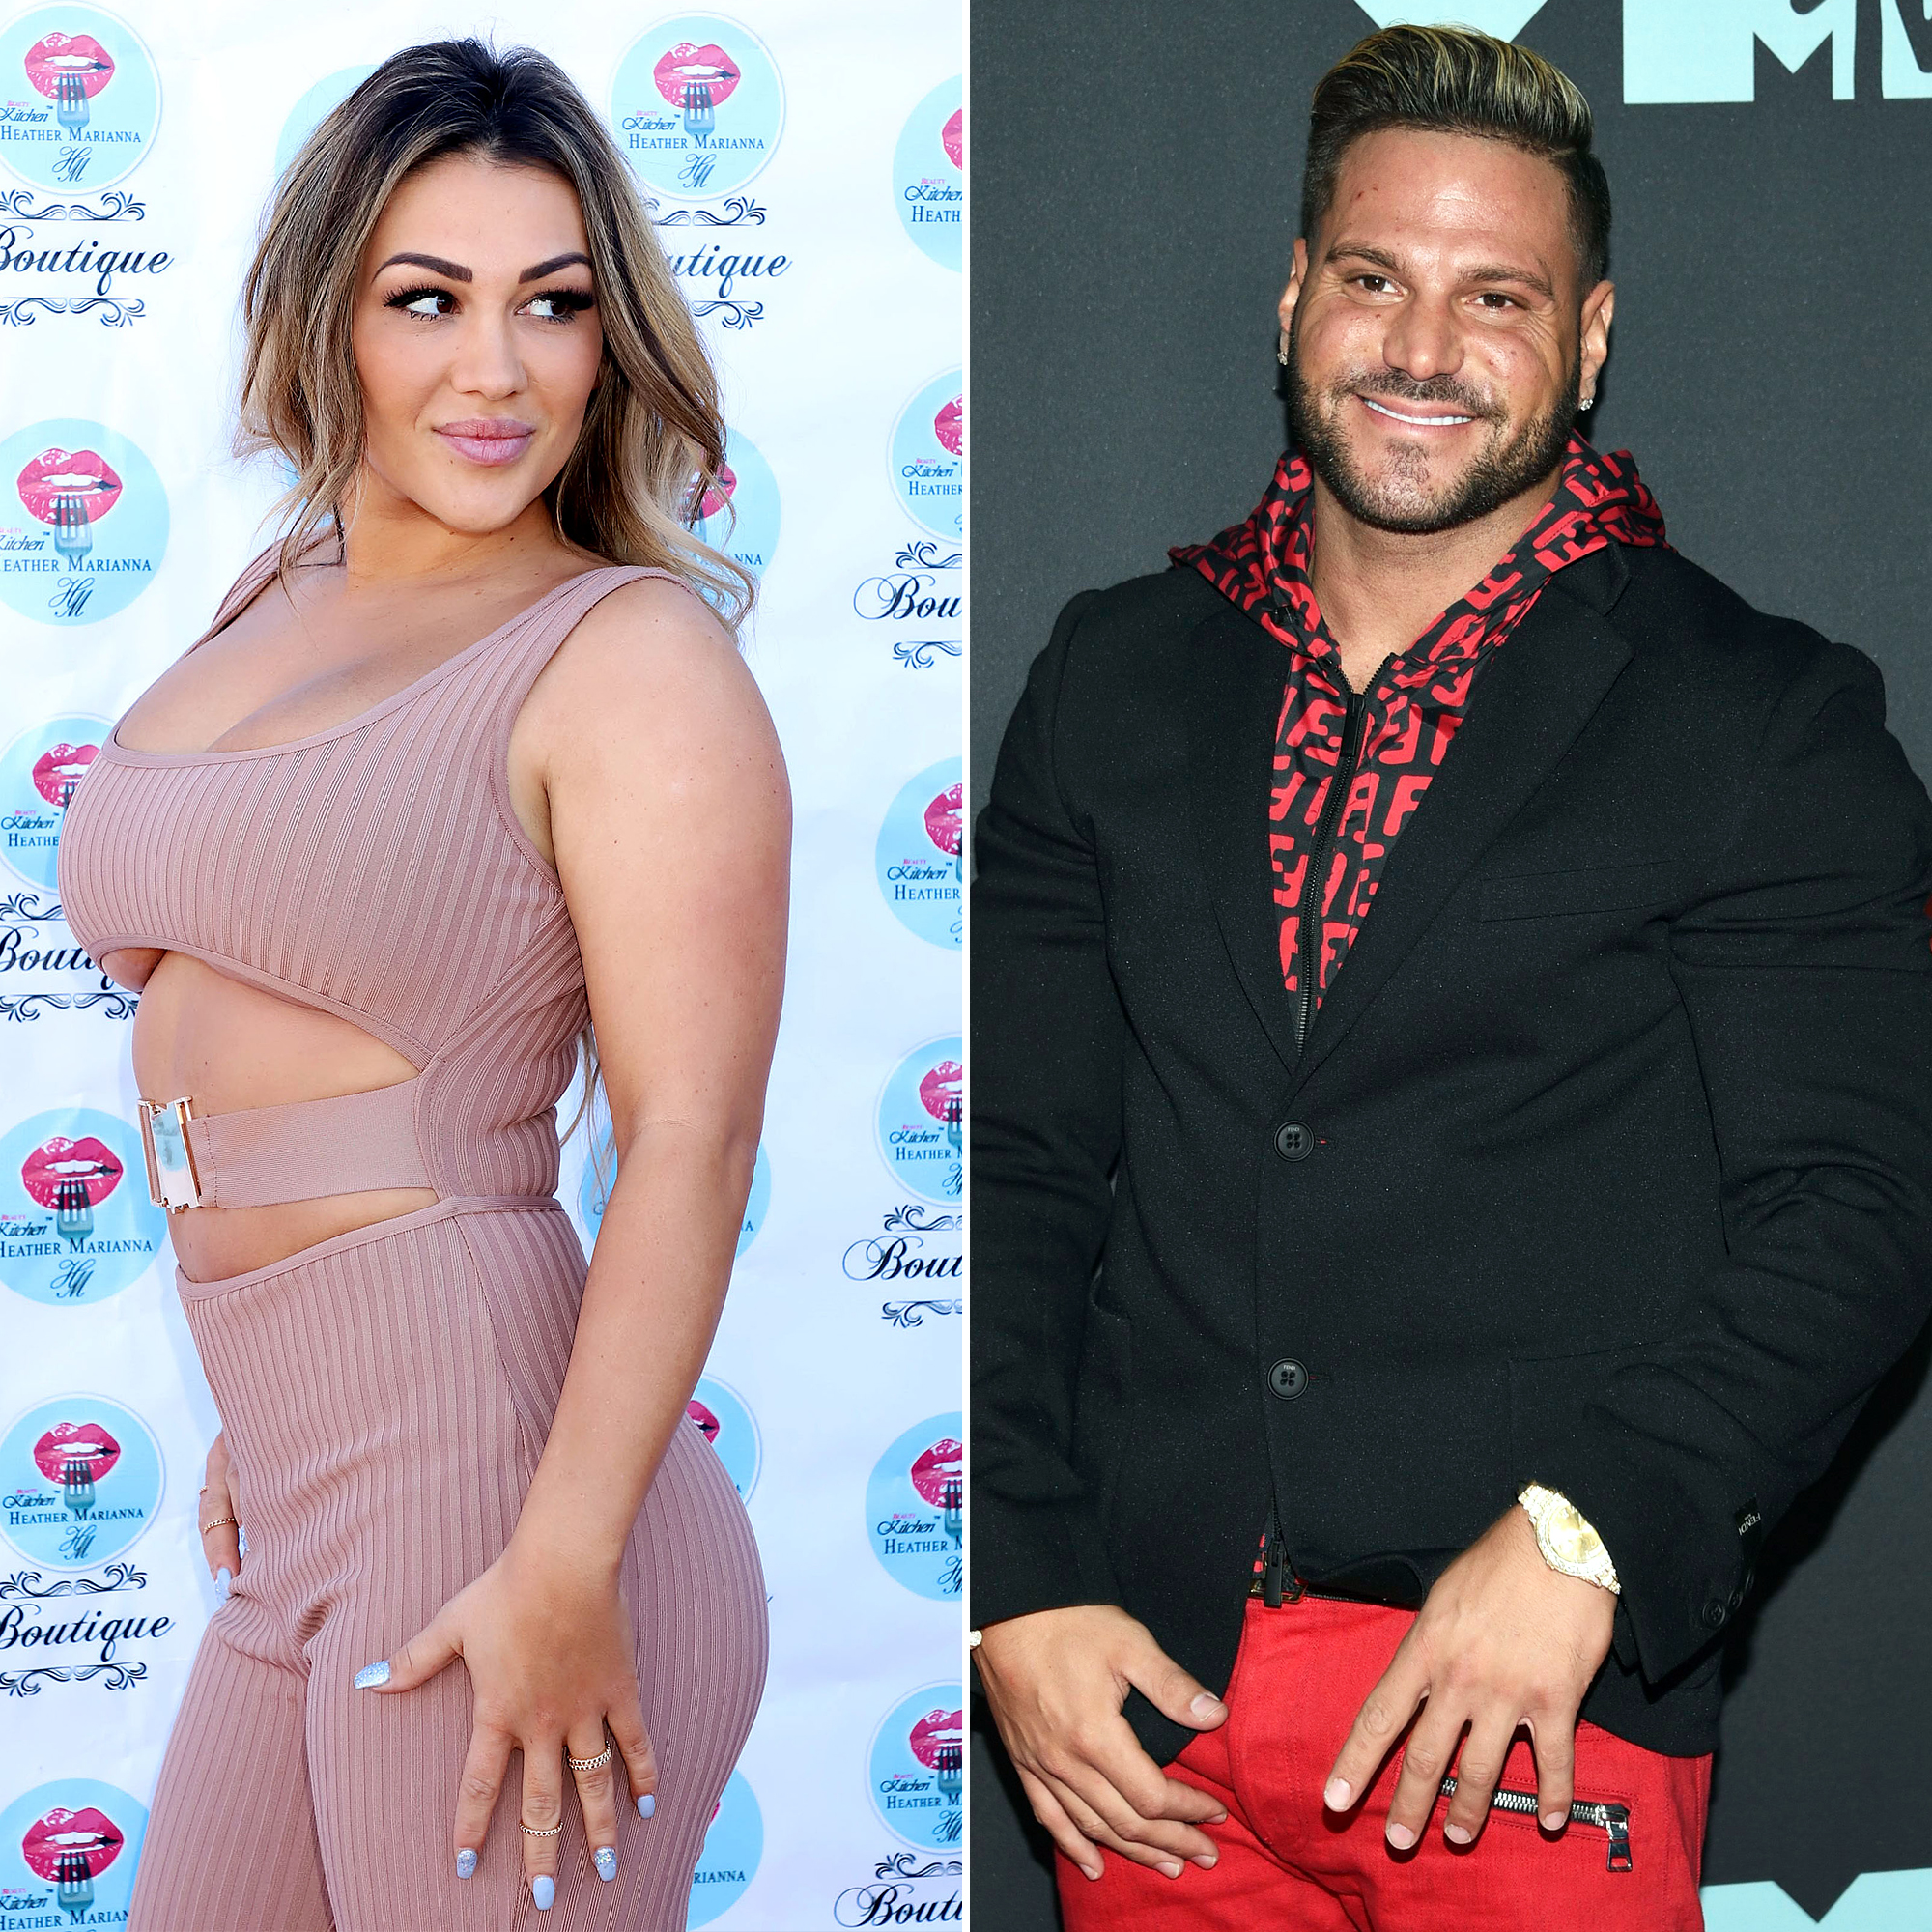 Jen Harley Posts About 'Peace' on IG Amid Ronnie Ortiz-Magro Split